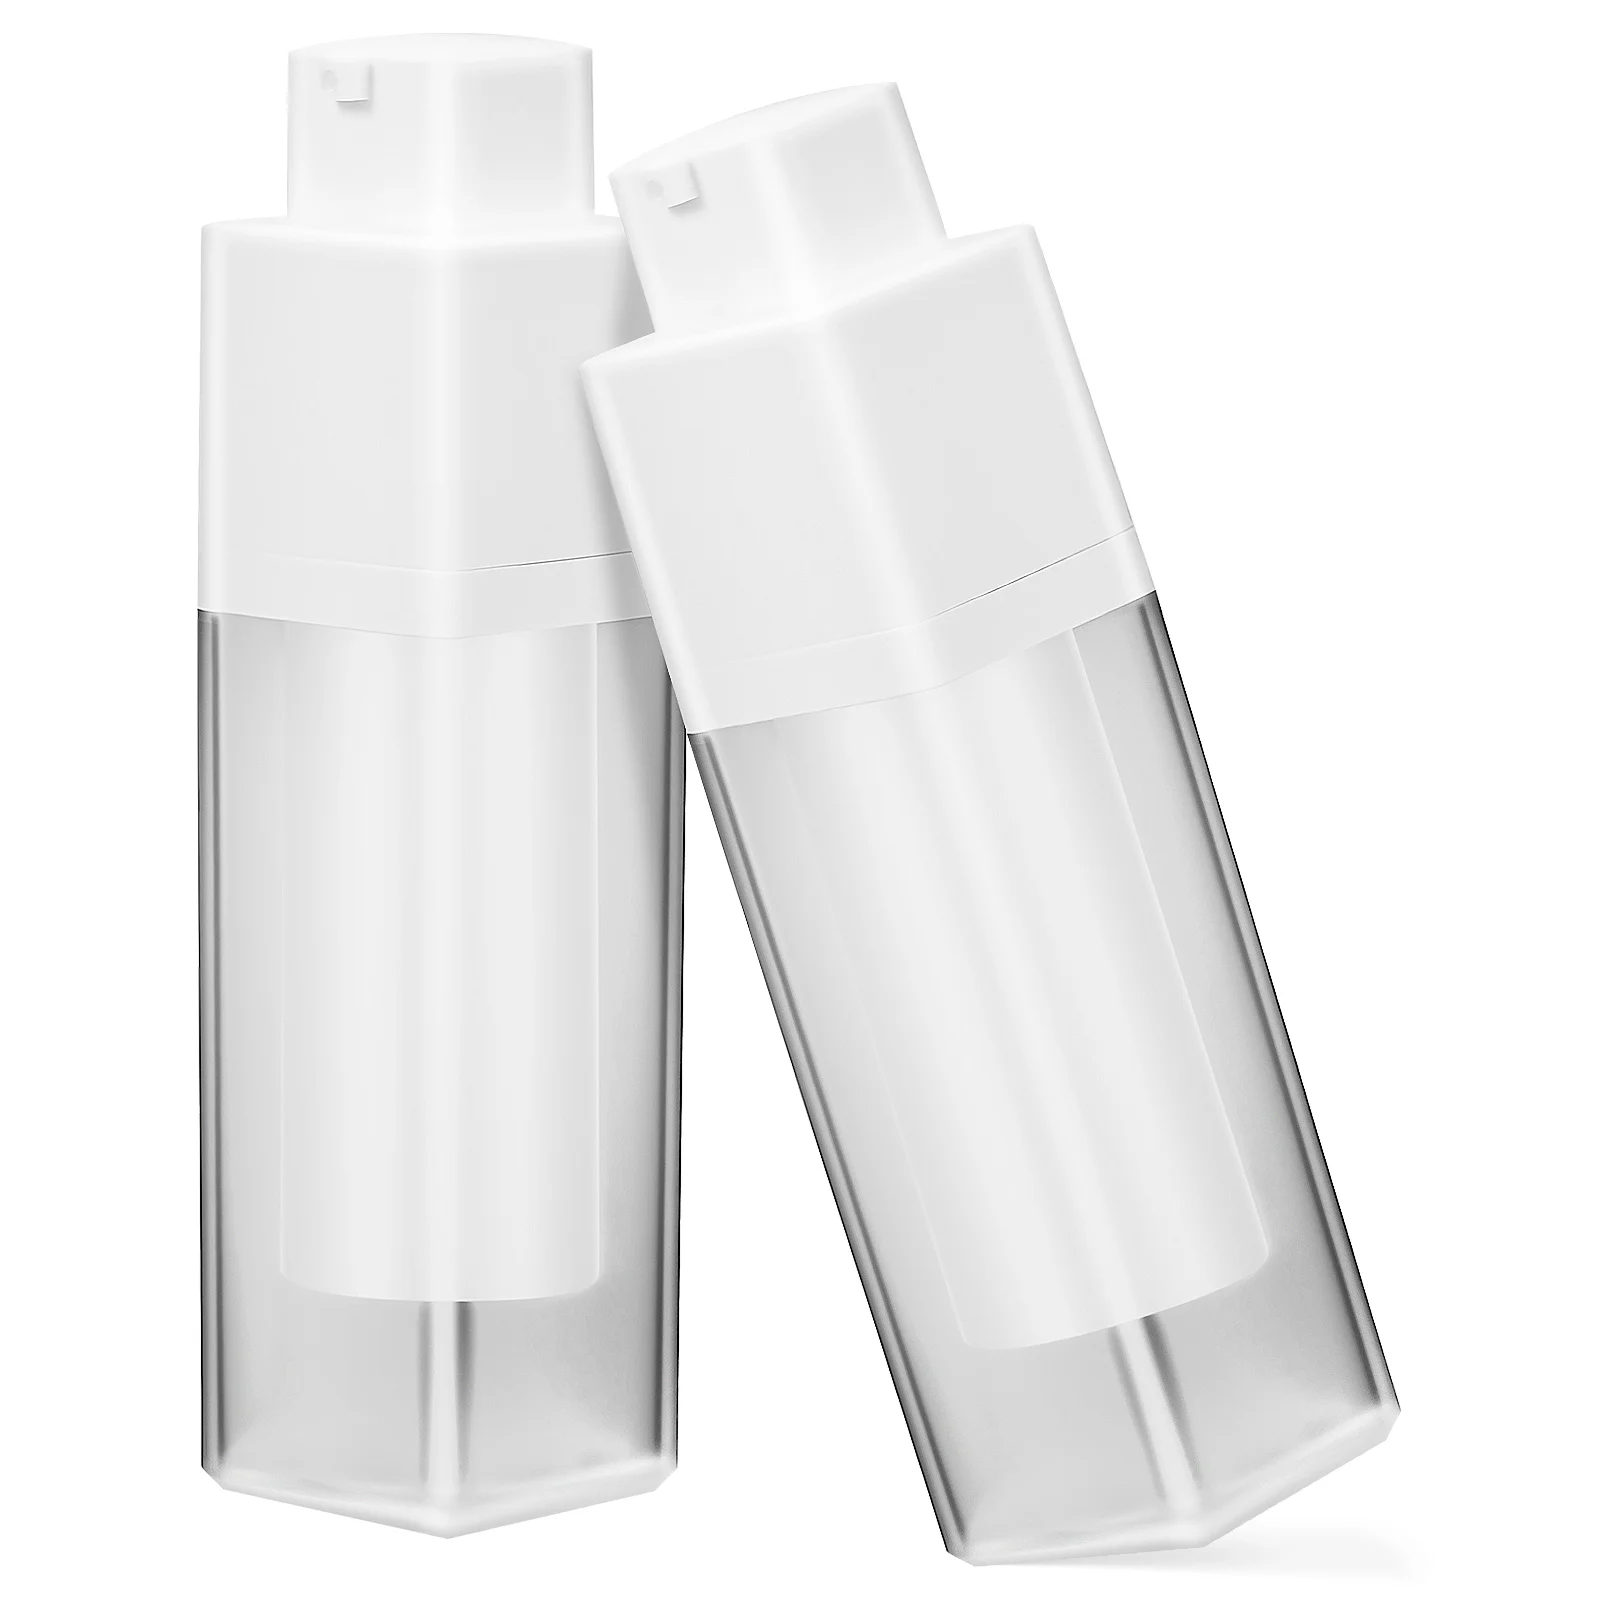 

Airless Cosmetic Container for Travel with Refillable Spray Bottle - 10ml and 30ml Sizes Available